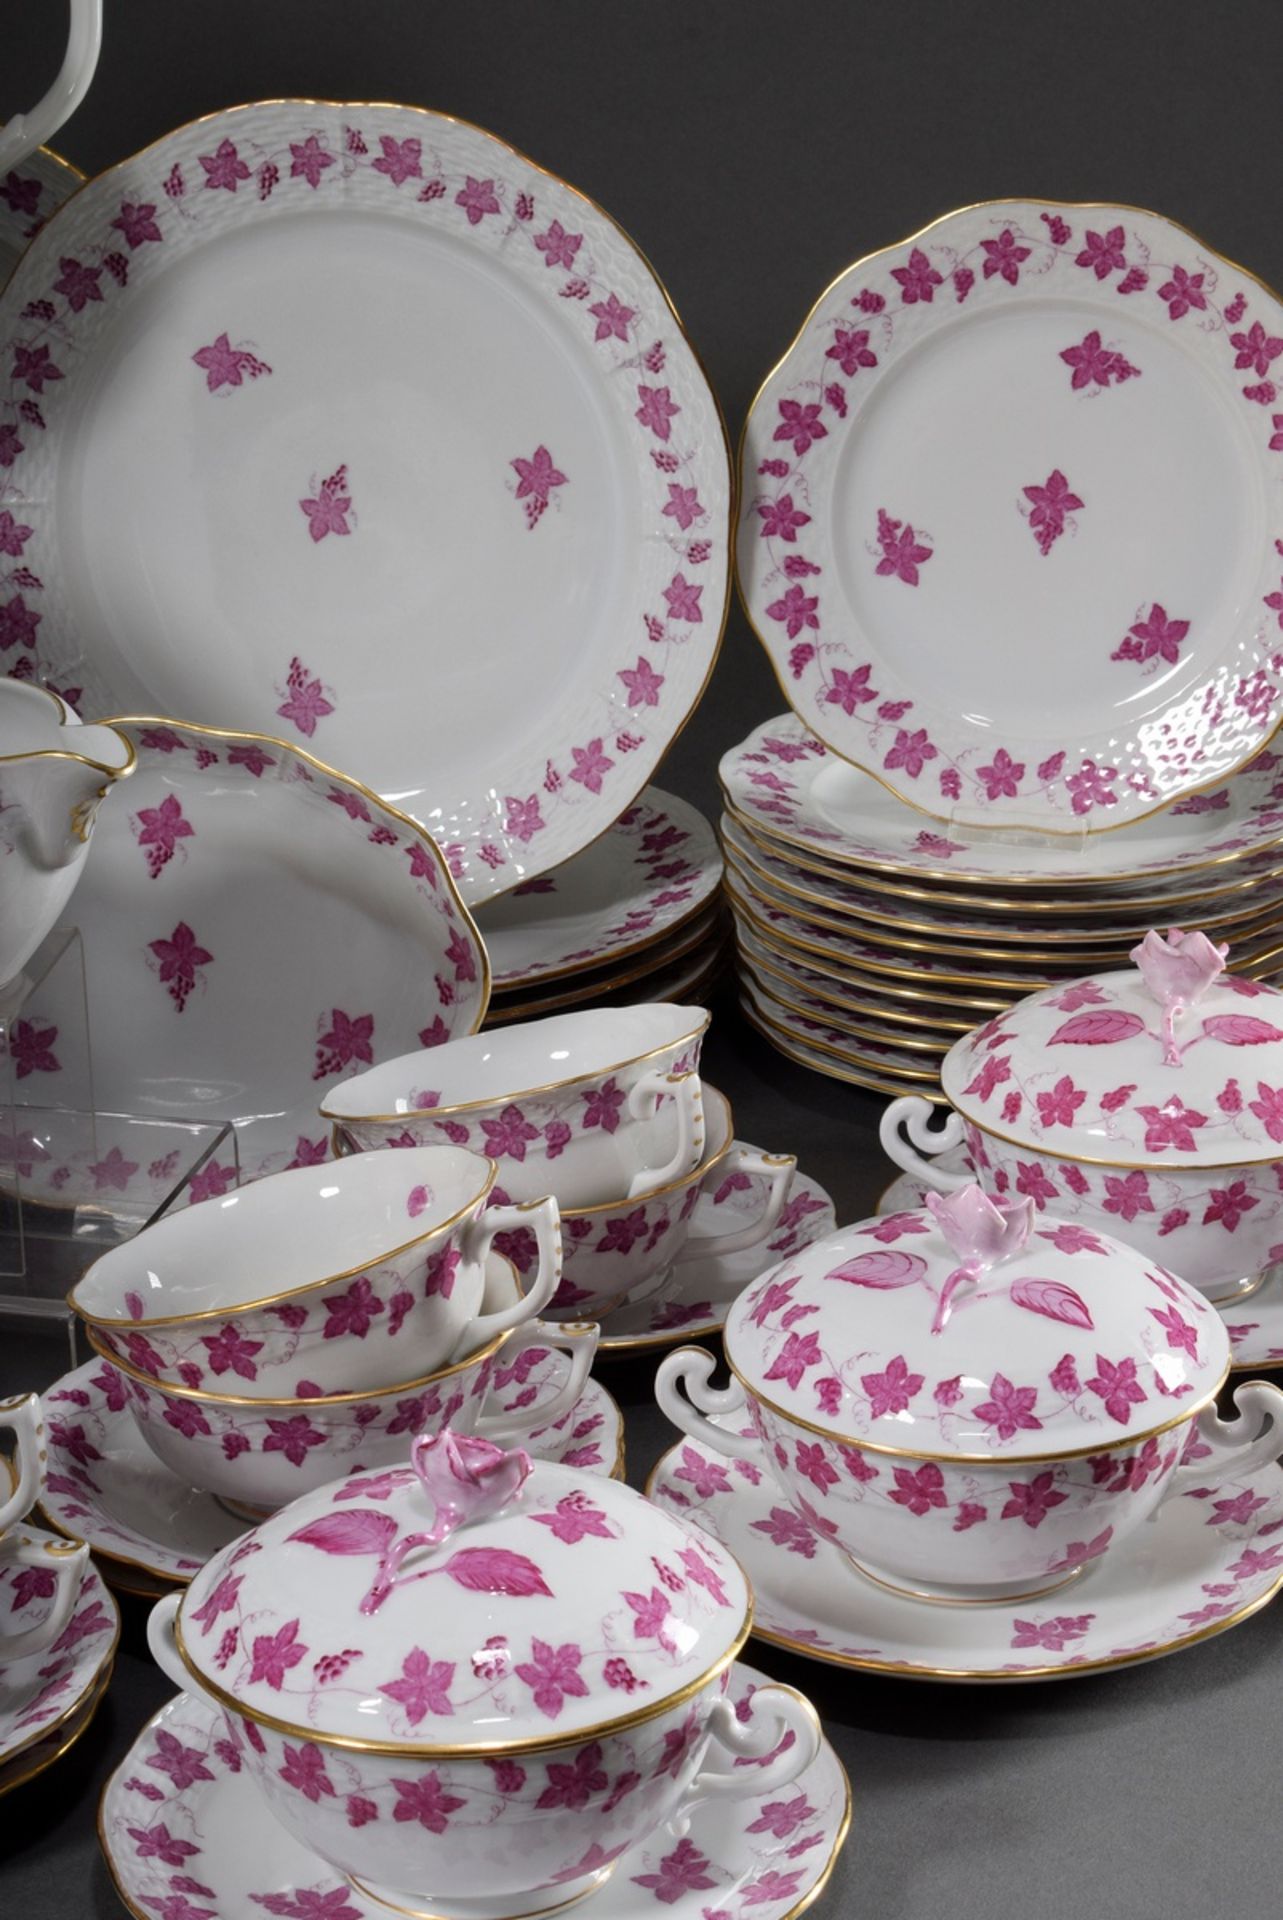 65 pieces Herend coffee and dinner service "Guirland de Raisins" with purple painting and gold rim, - Image 4 of 7